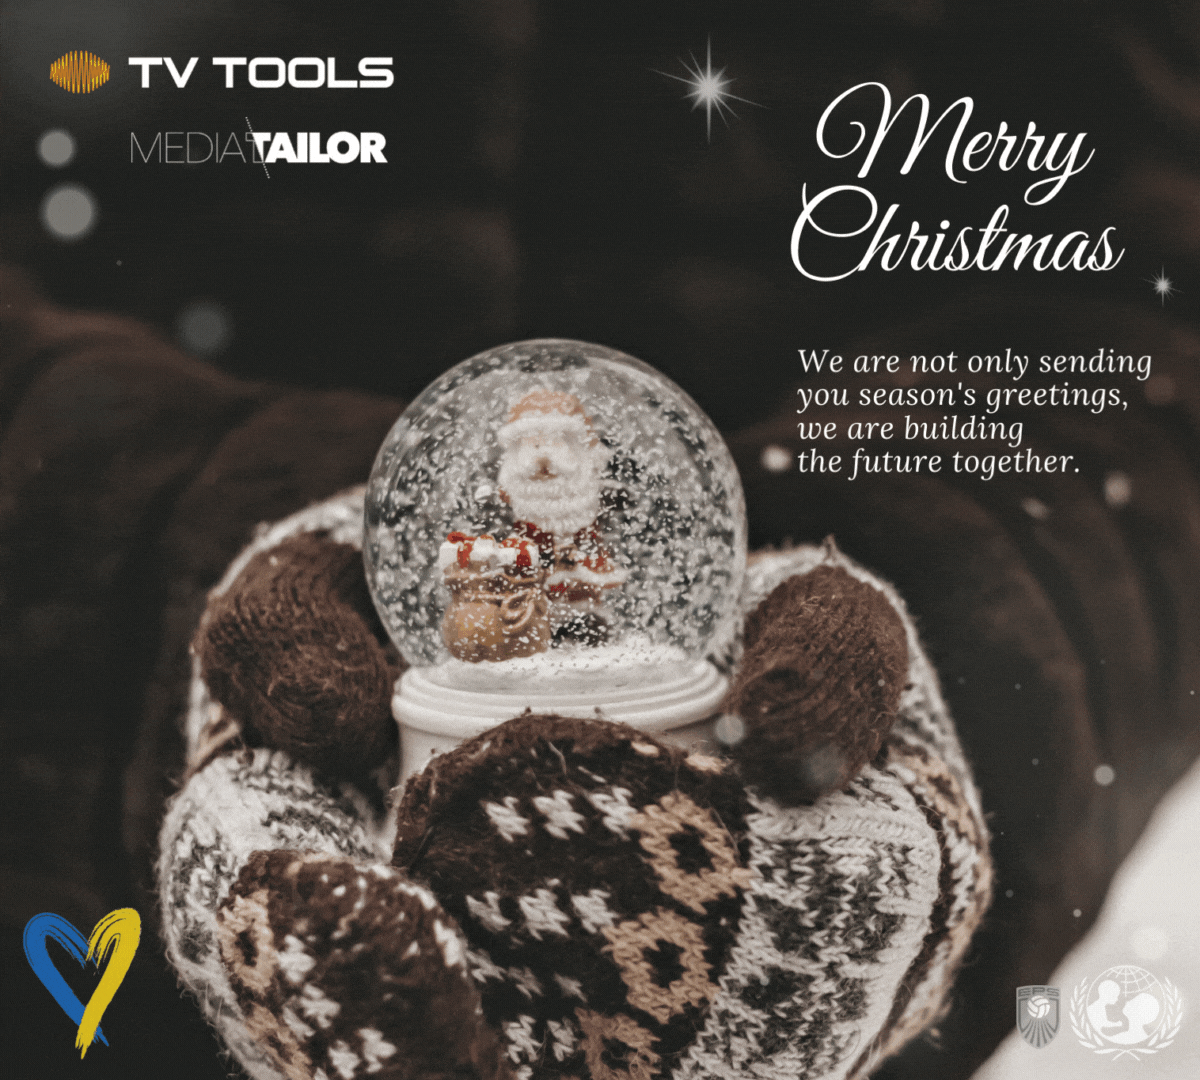 Merry Christmas from TV Tools!